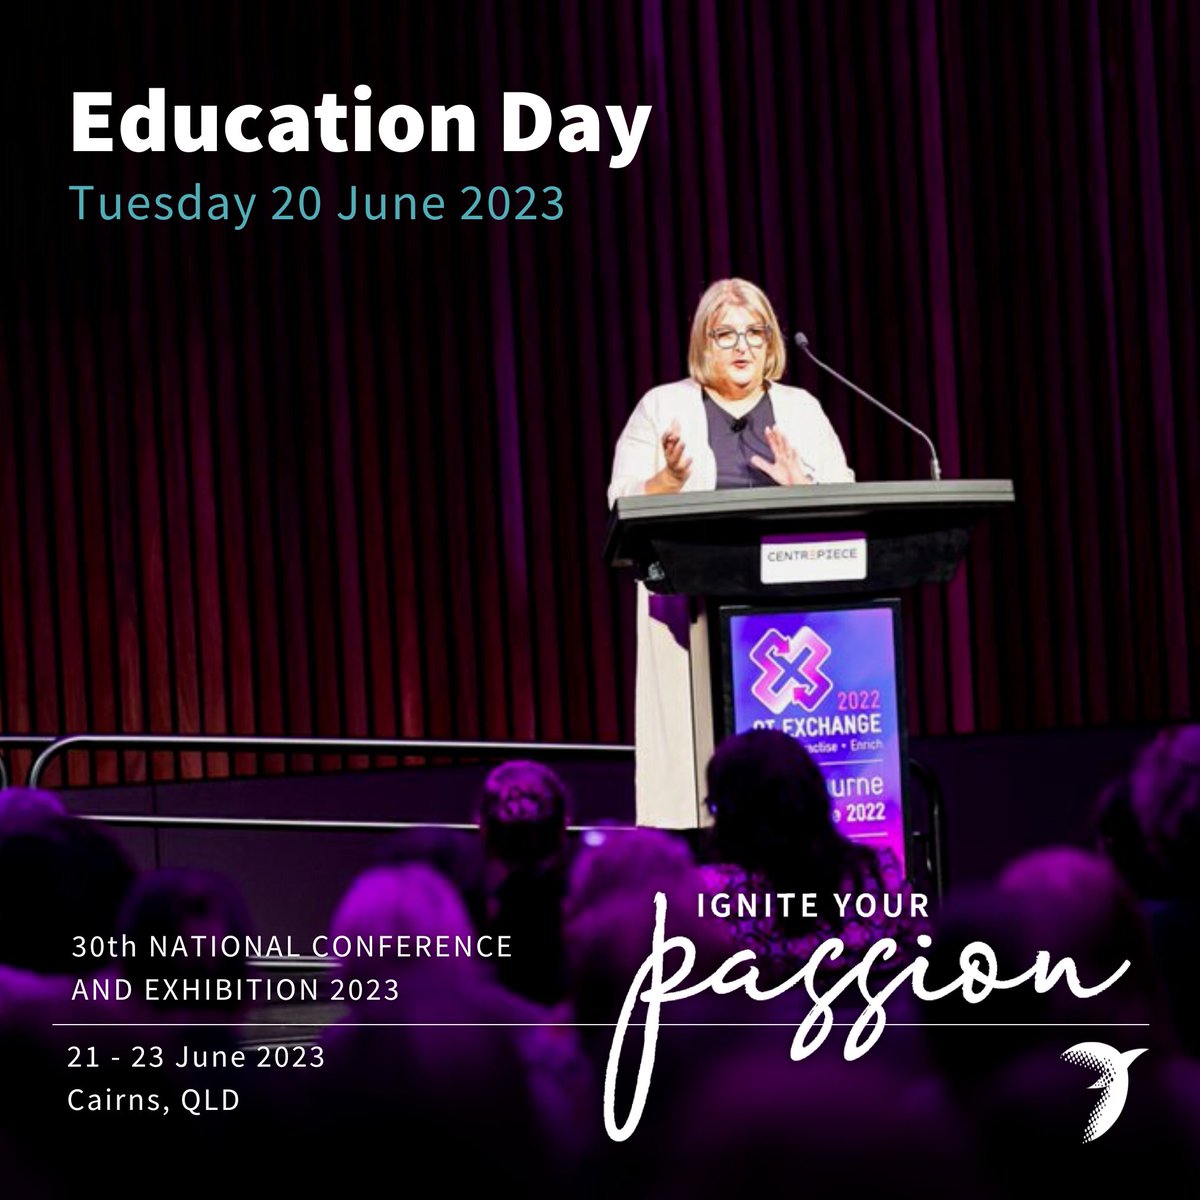 Academics and educators – #OTAUS2023 Education Day registrations now open! Attend this pre-conference event, held 20 June, to discuss challenges and opportunities for OT education in Aus. Member Special ends 28 Feb! Register ➡️otausevents.com.au otausevents.com.au/otaus2023/regi…